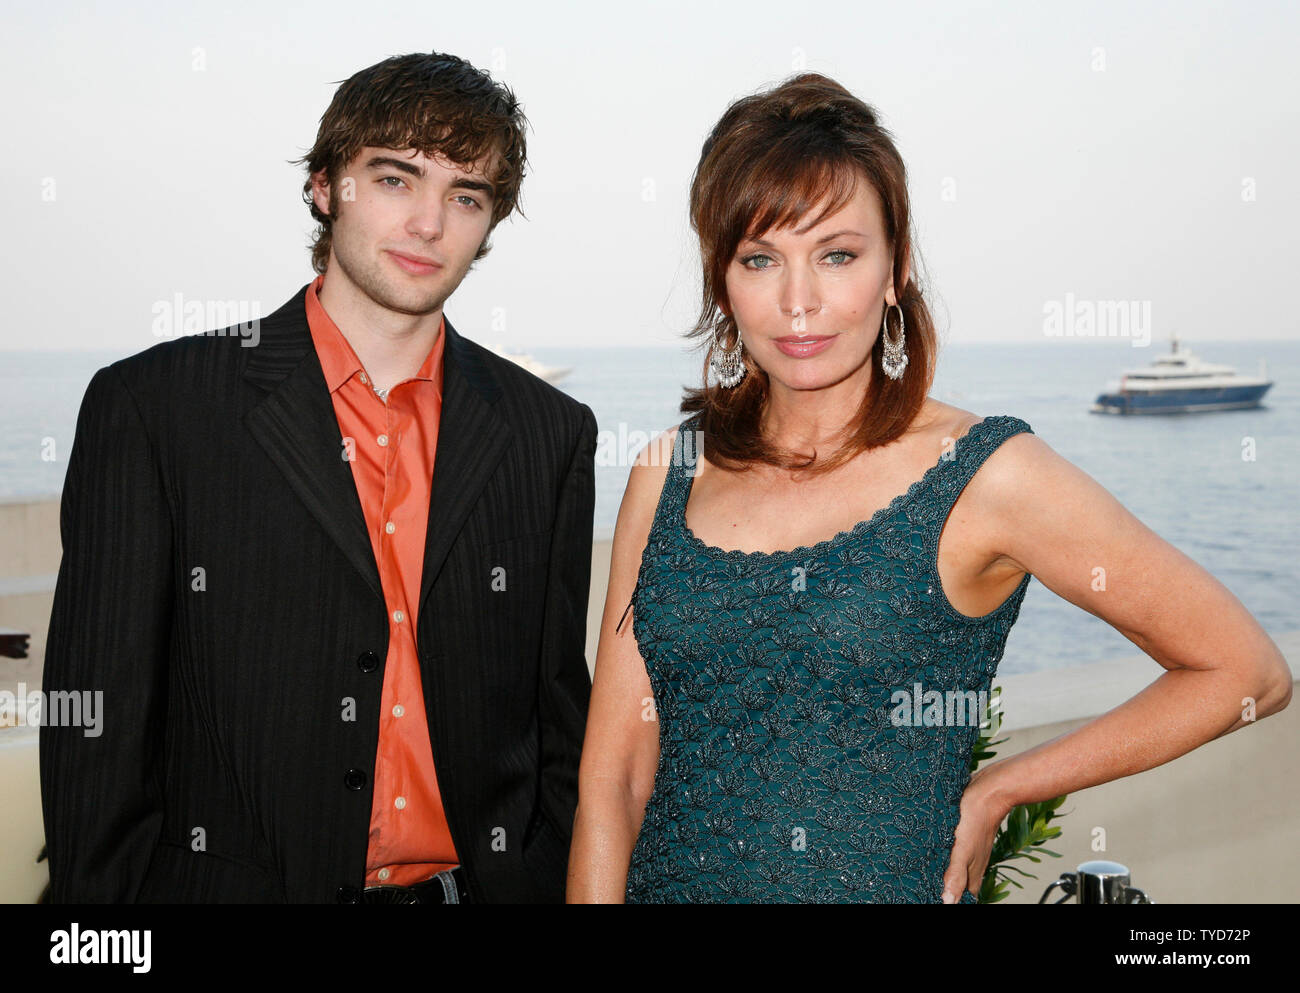 Actor Drew Tyler Bell and actress Lesley Anne Down of the TV series 'The Bold and the Beautiful' attend a Festival party during the 47th Monte Carlo Television Festival in Monte Carlo, Monaco on June 11, 2007.  (UPI Photo/David Silpa) Stock Photo